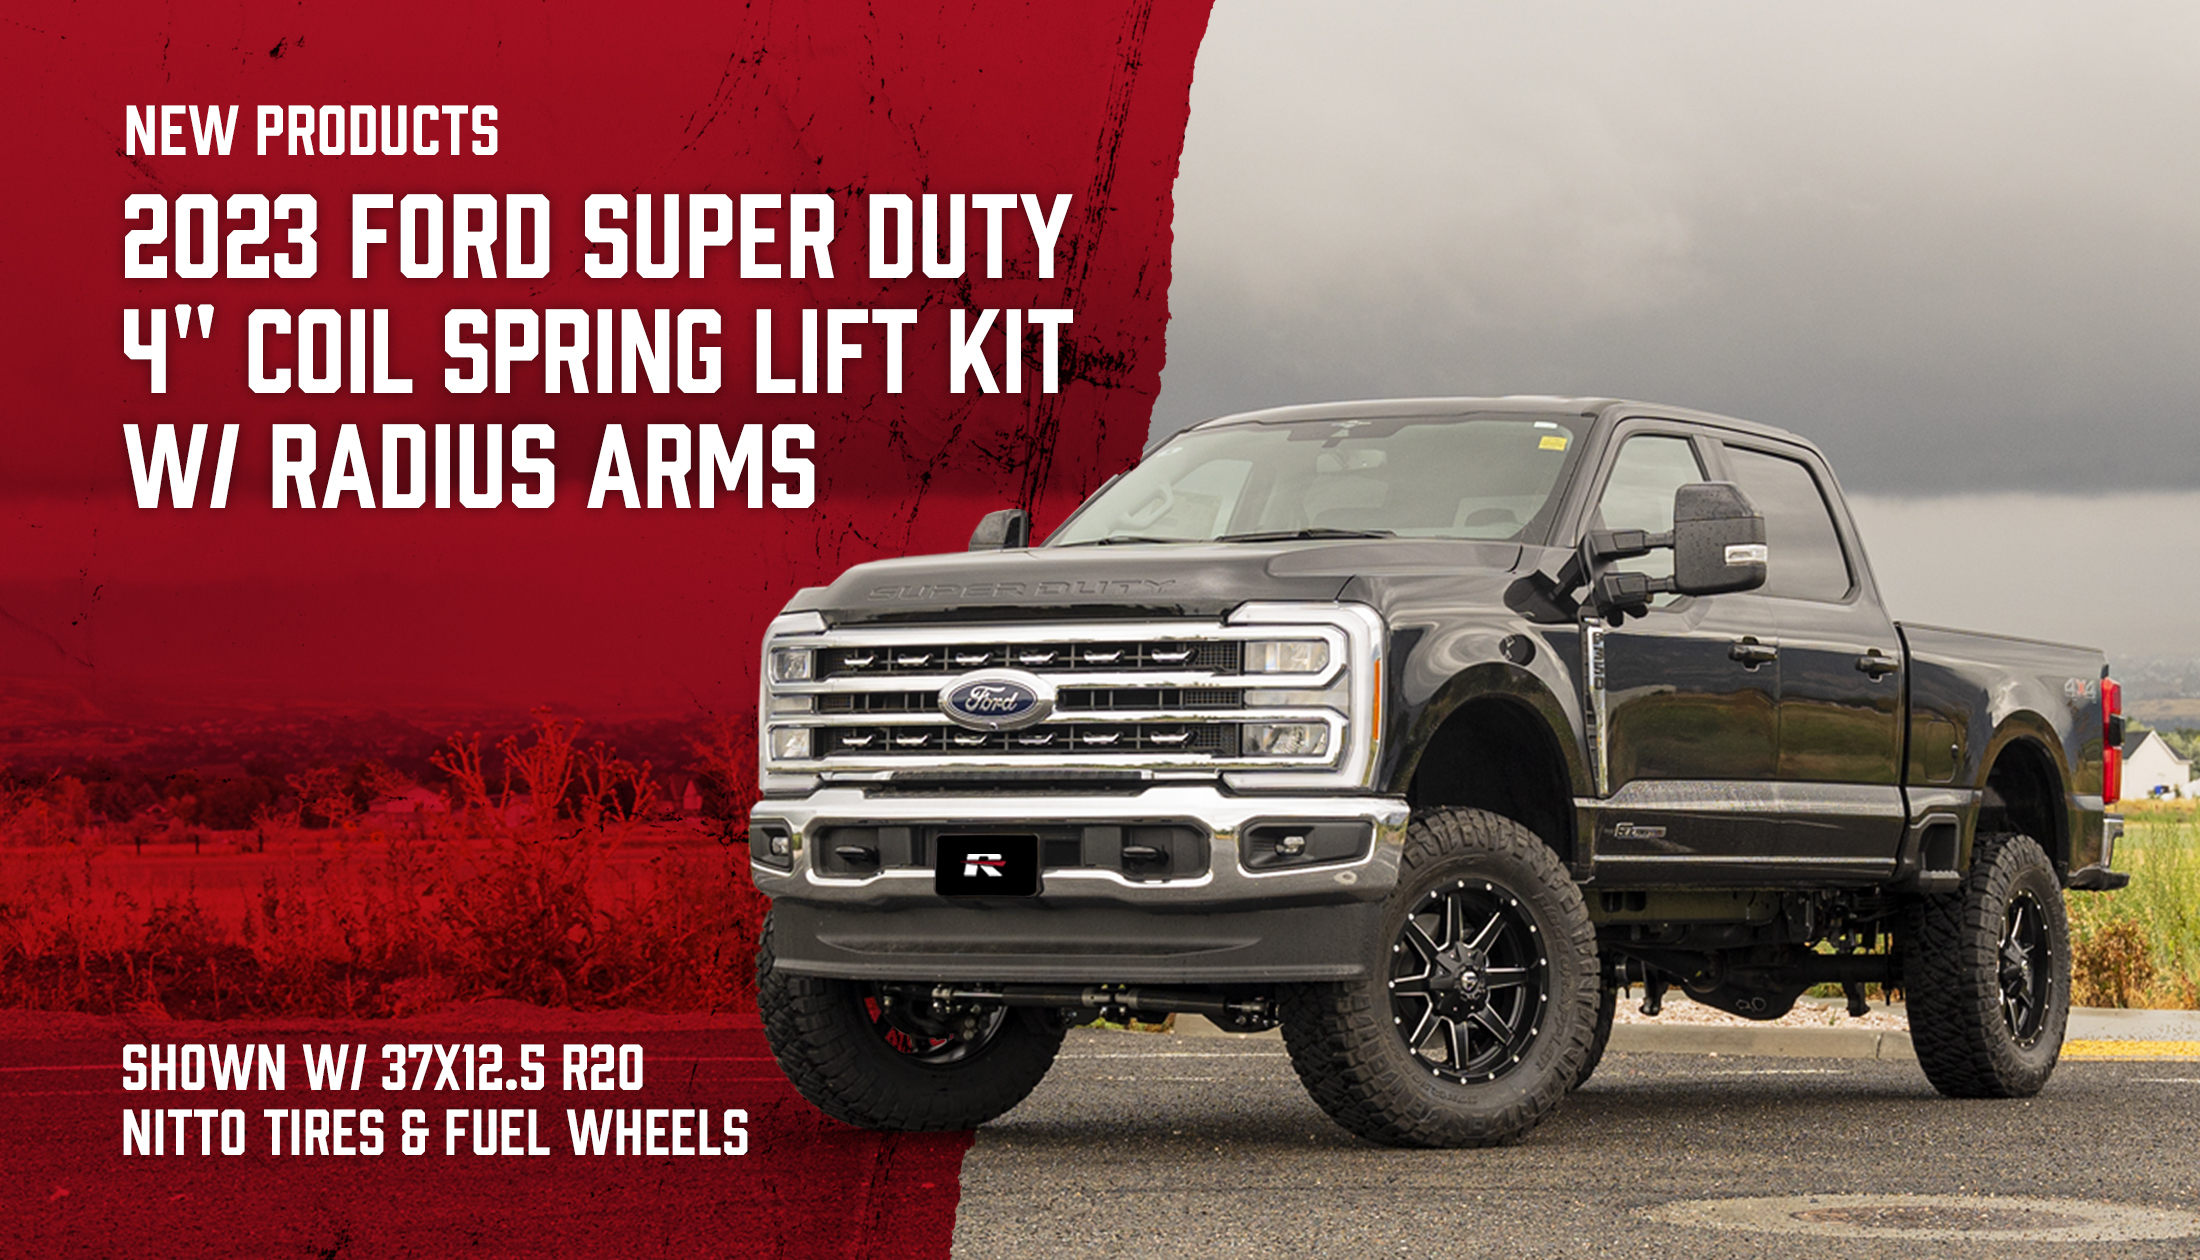 ReadyLIFT Introduces an All-New 2023 Ford Super-Duty 4" Coil Spring Lift Kits